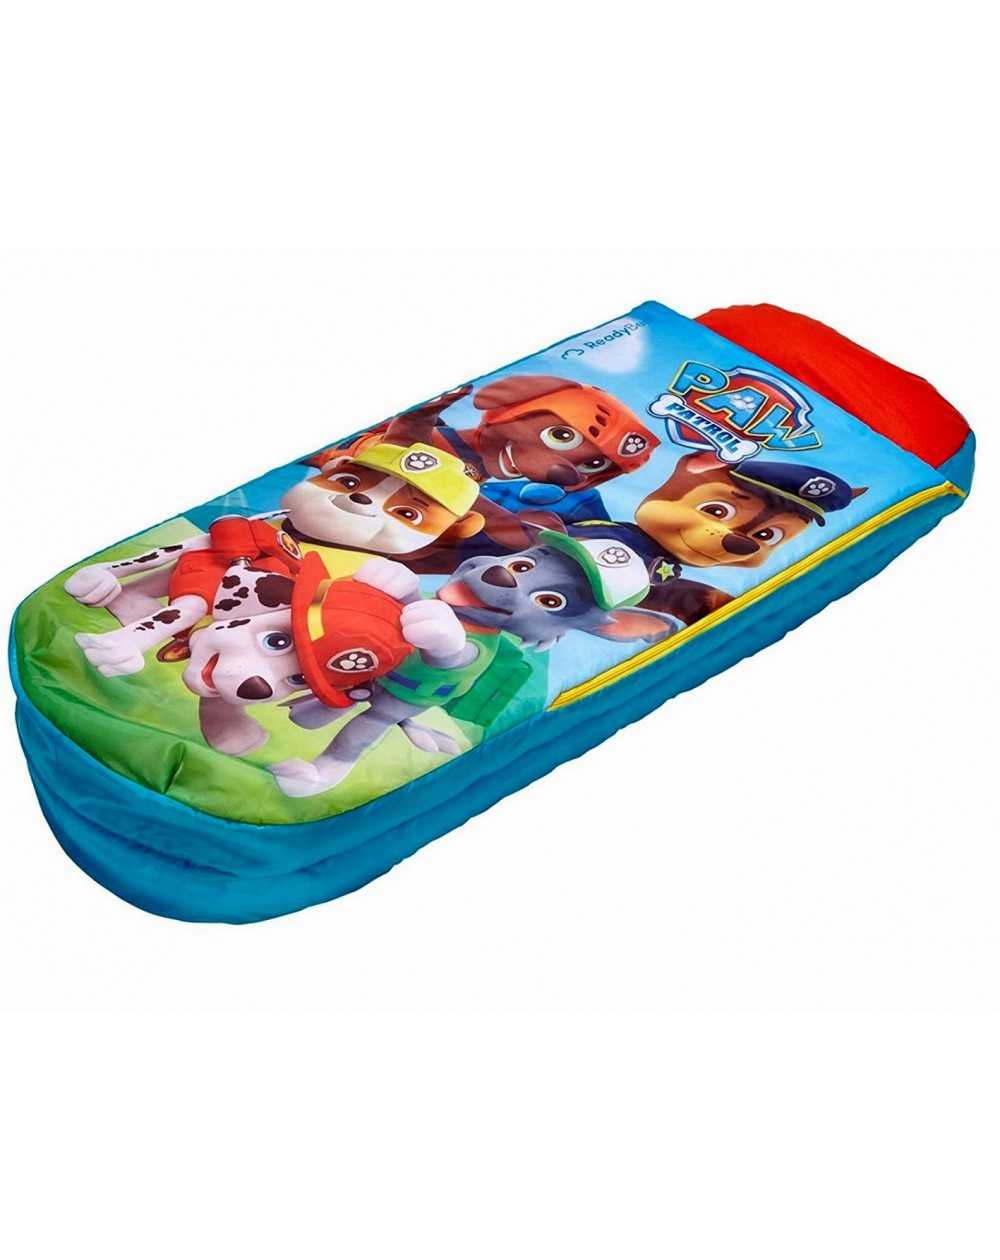 Sac de couchage gonflable Paw Patrol